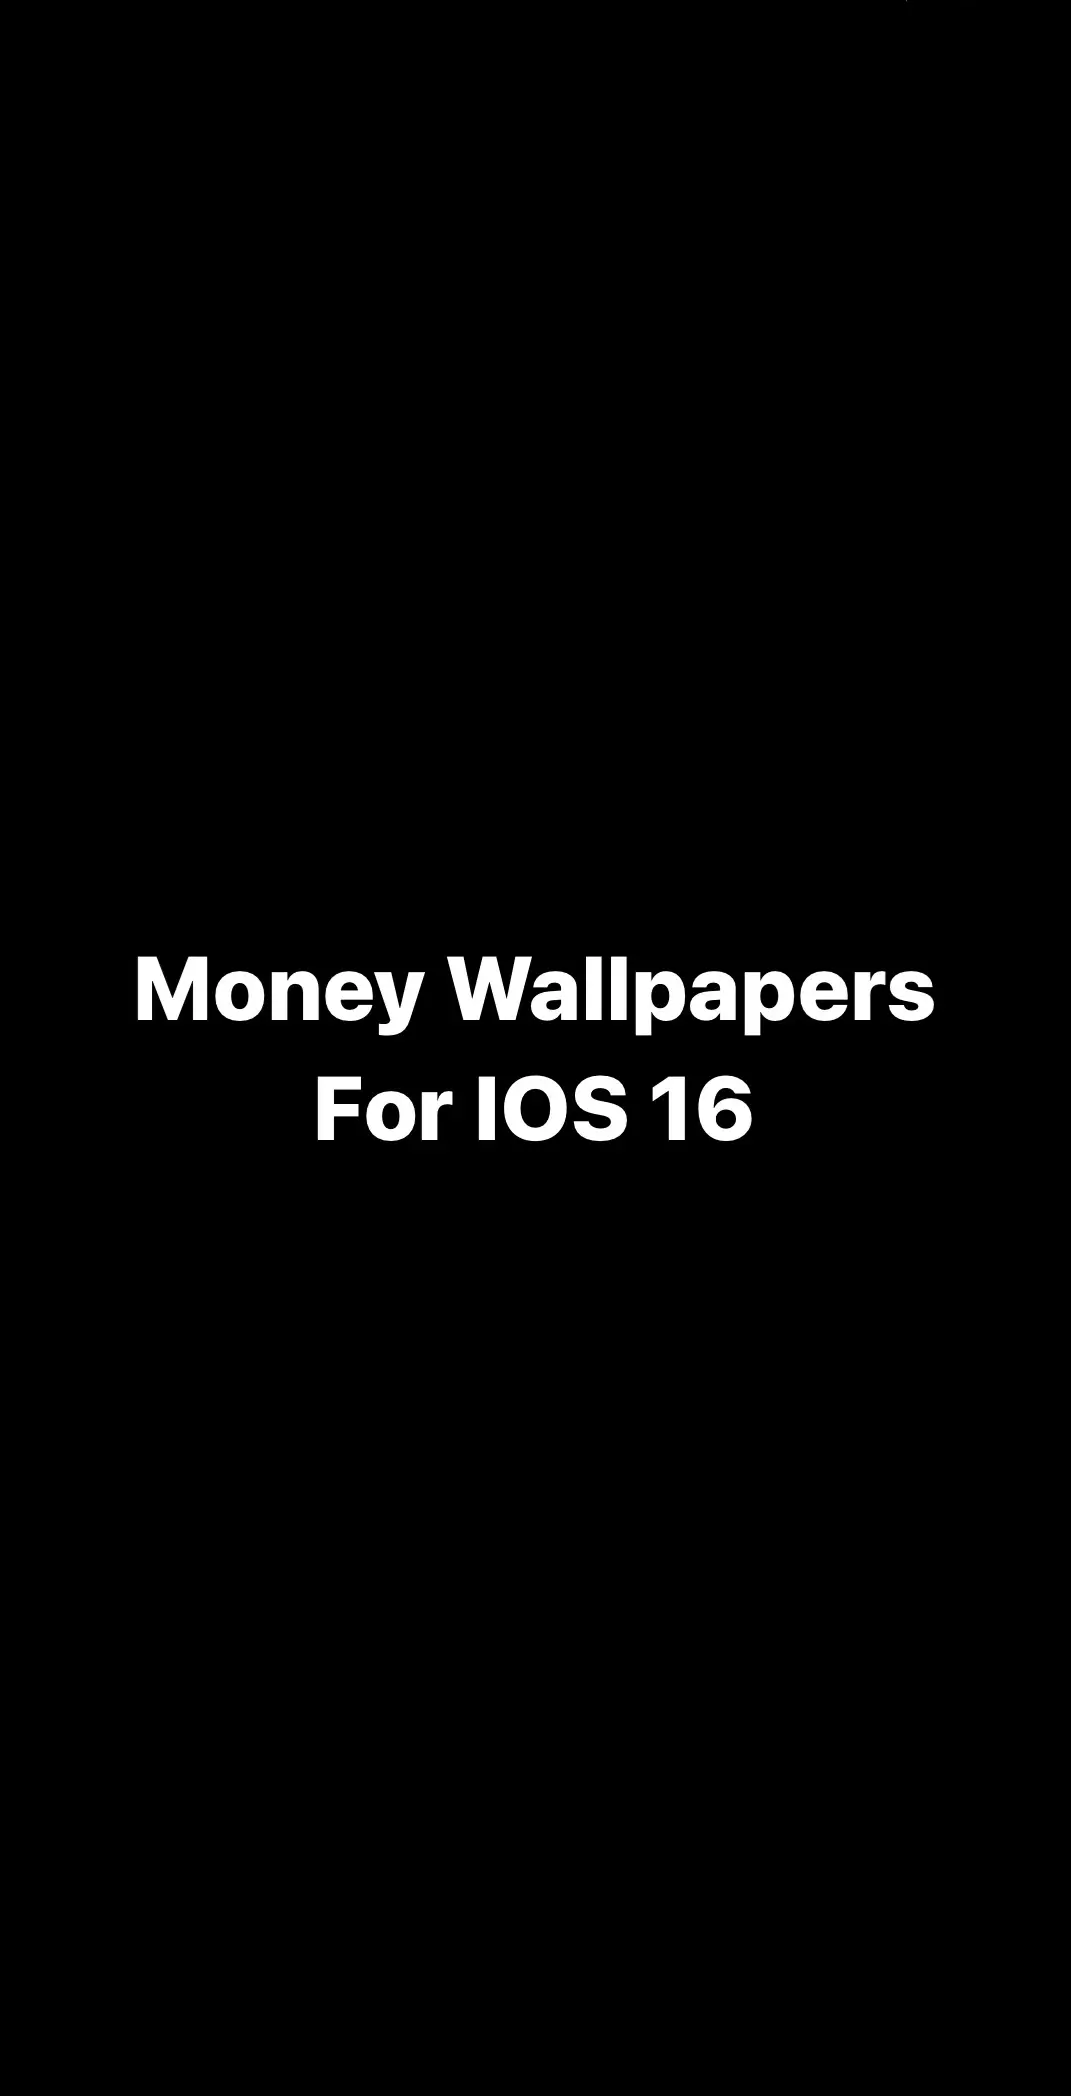 Money Wallpapers for IOS 16 #wallpapers #wallpaper #ios16 #ioswallpaper #wallpaper4k #ios16wallpaper #money #moneywallpapers 